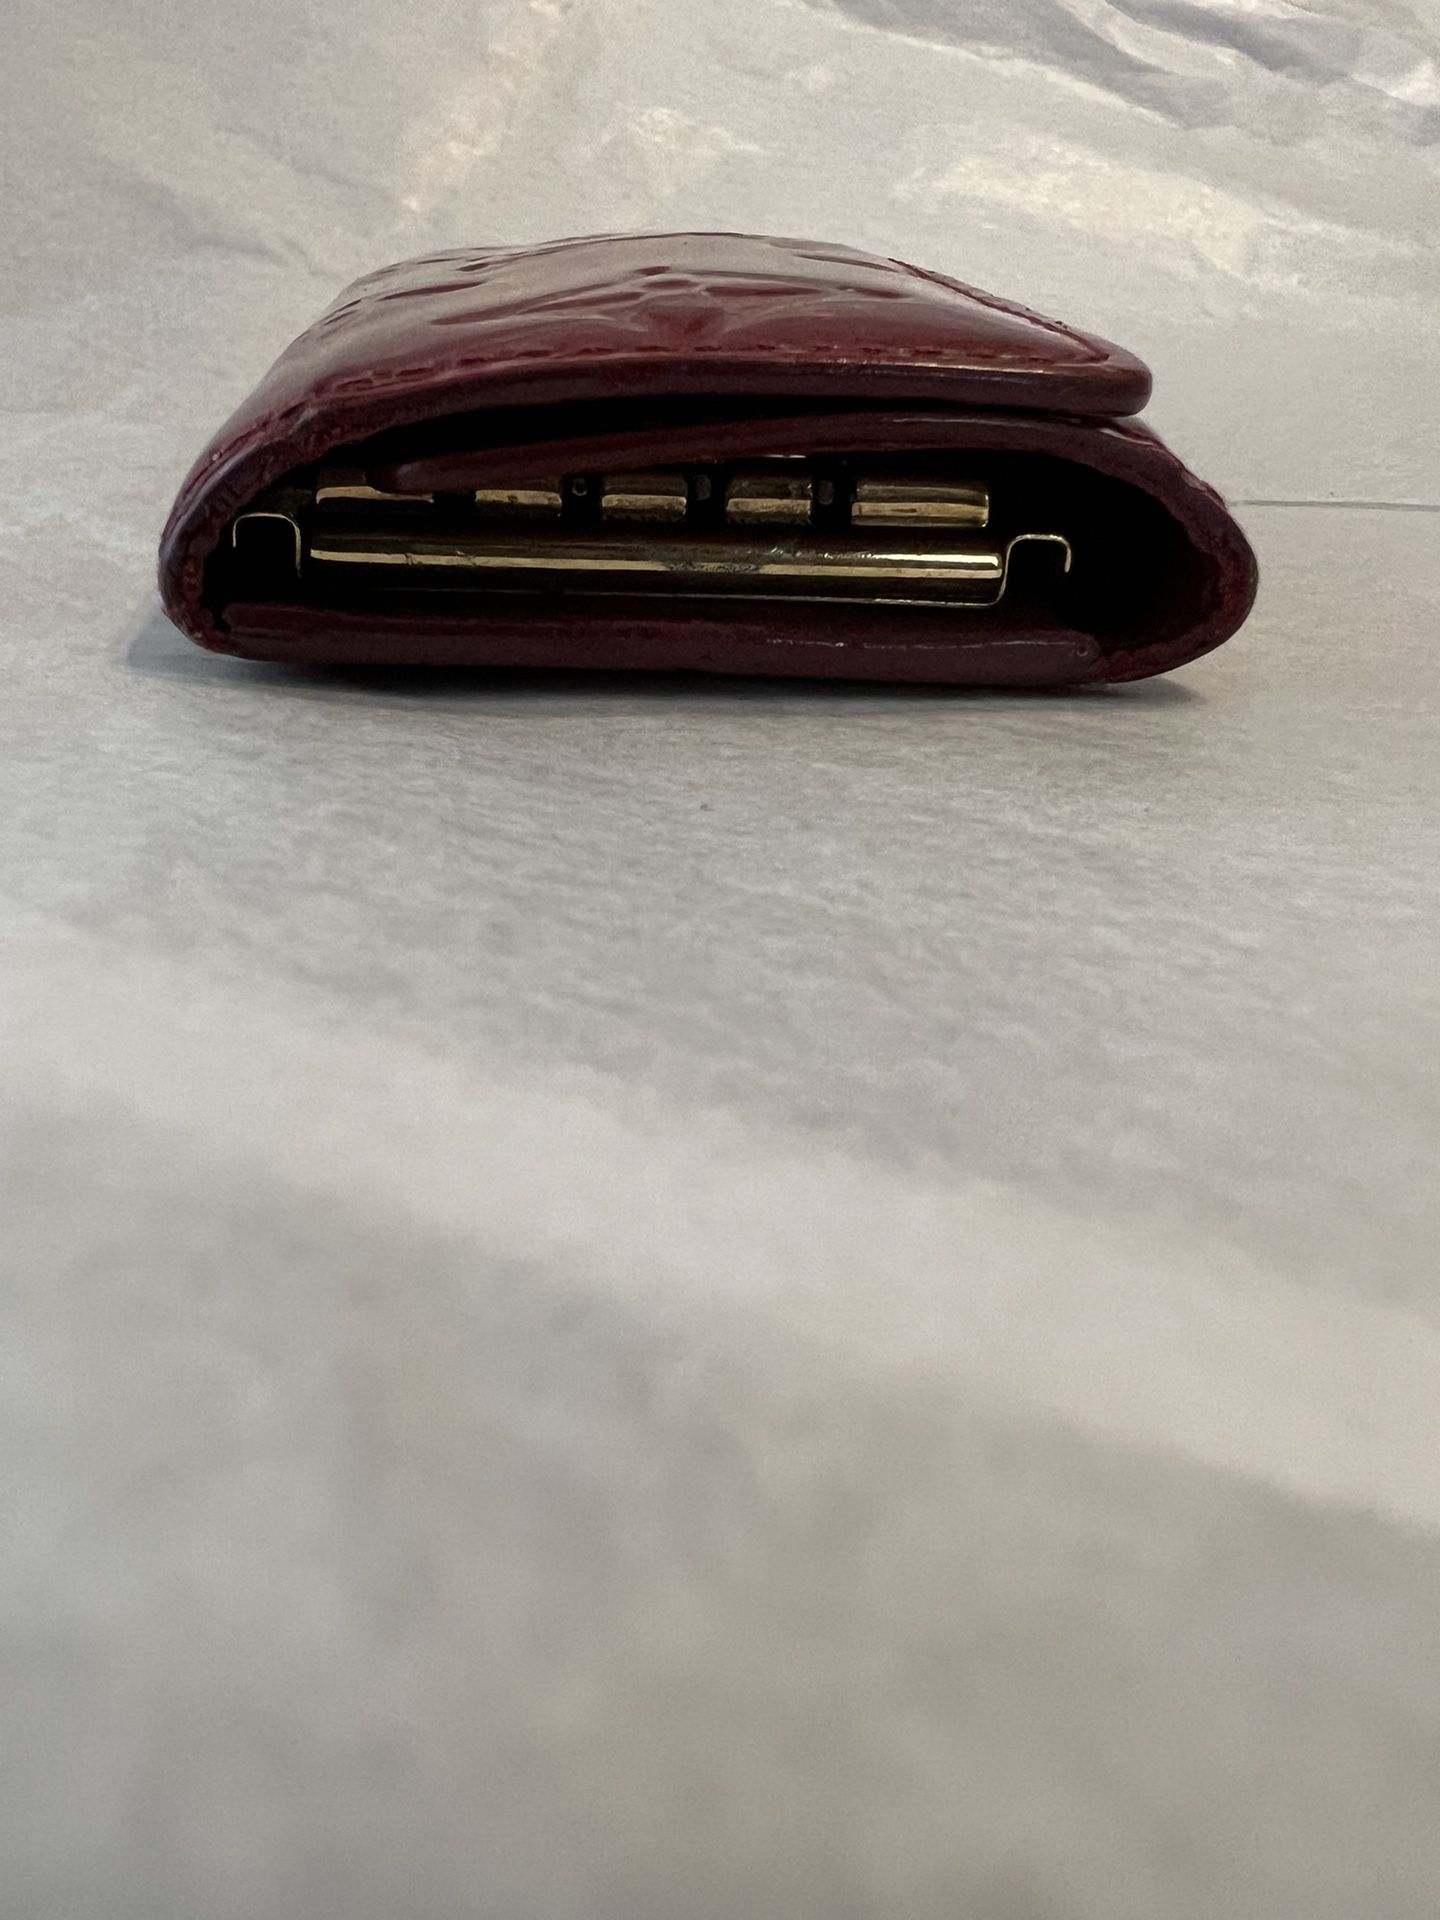 Louis Vuitton Vernis Key Holder With Complimentary Chain for Sale in  Houston, TX - OfferUp